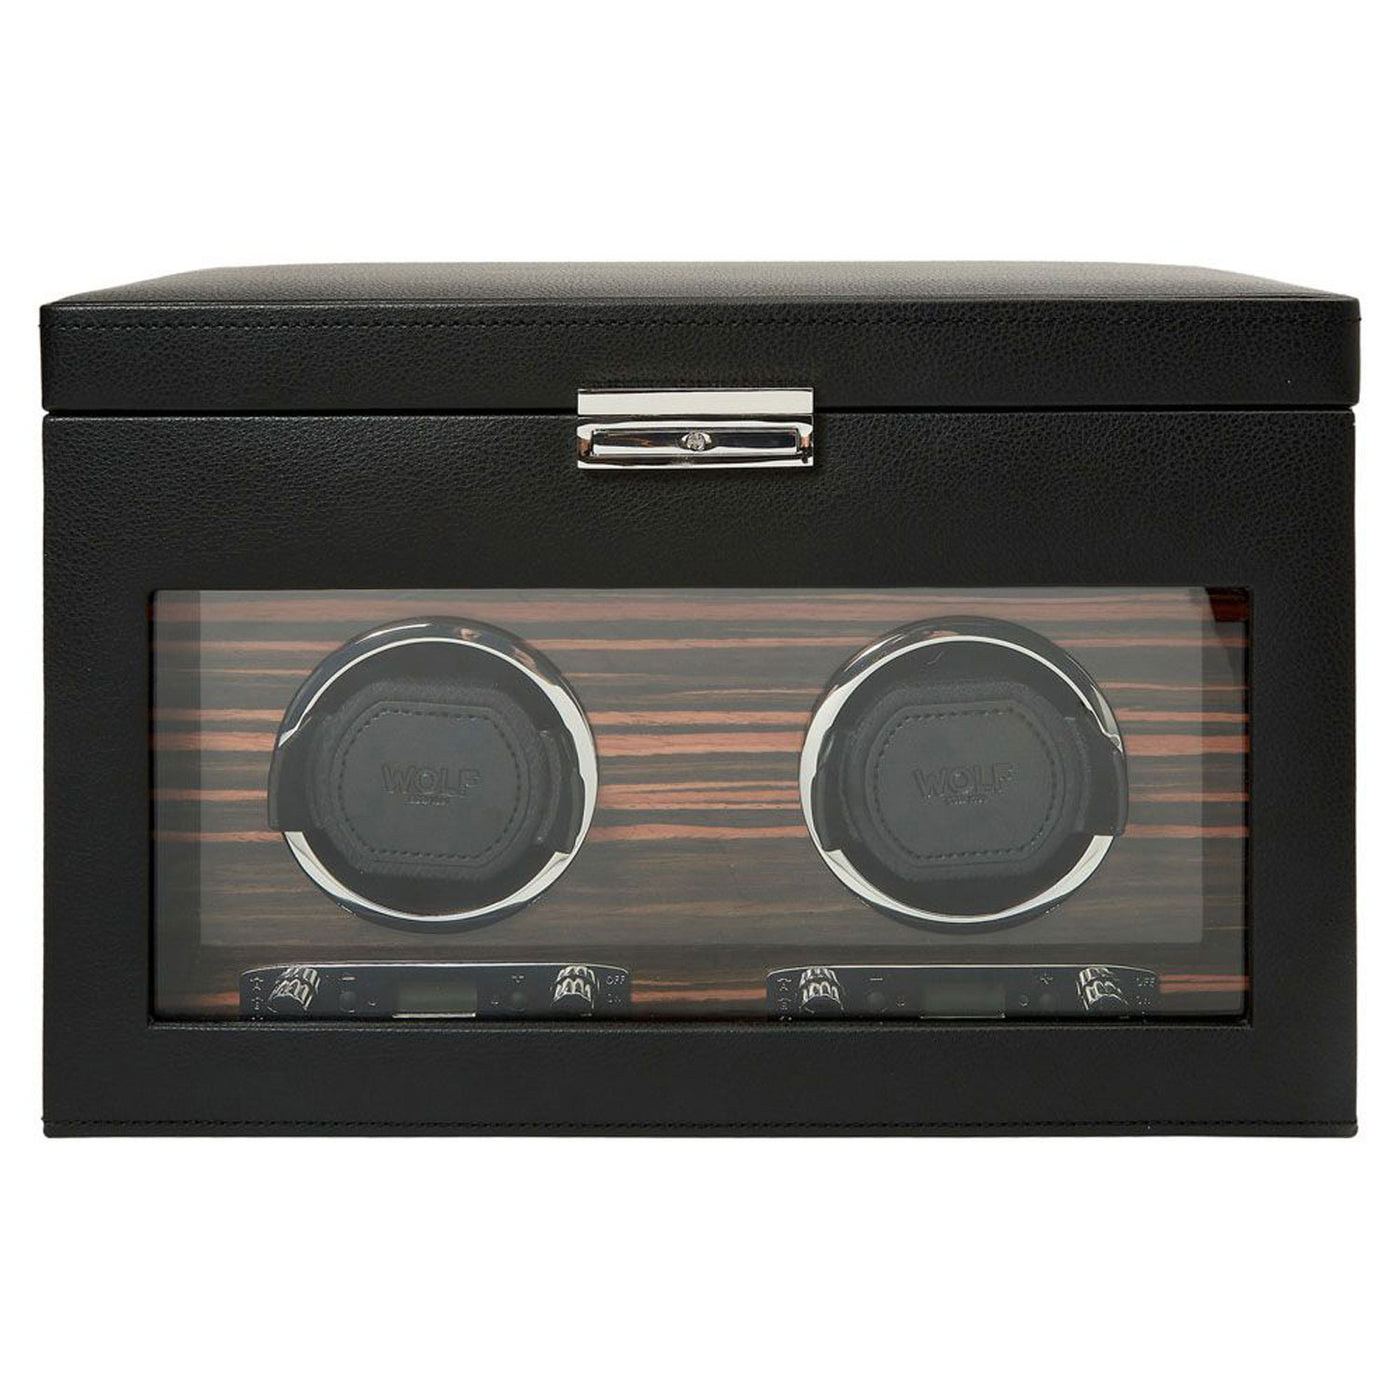 Wolf 1834 Roadster Programmable Double Watch Winder With Storage – 457256